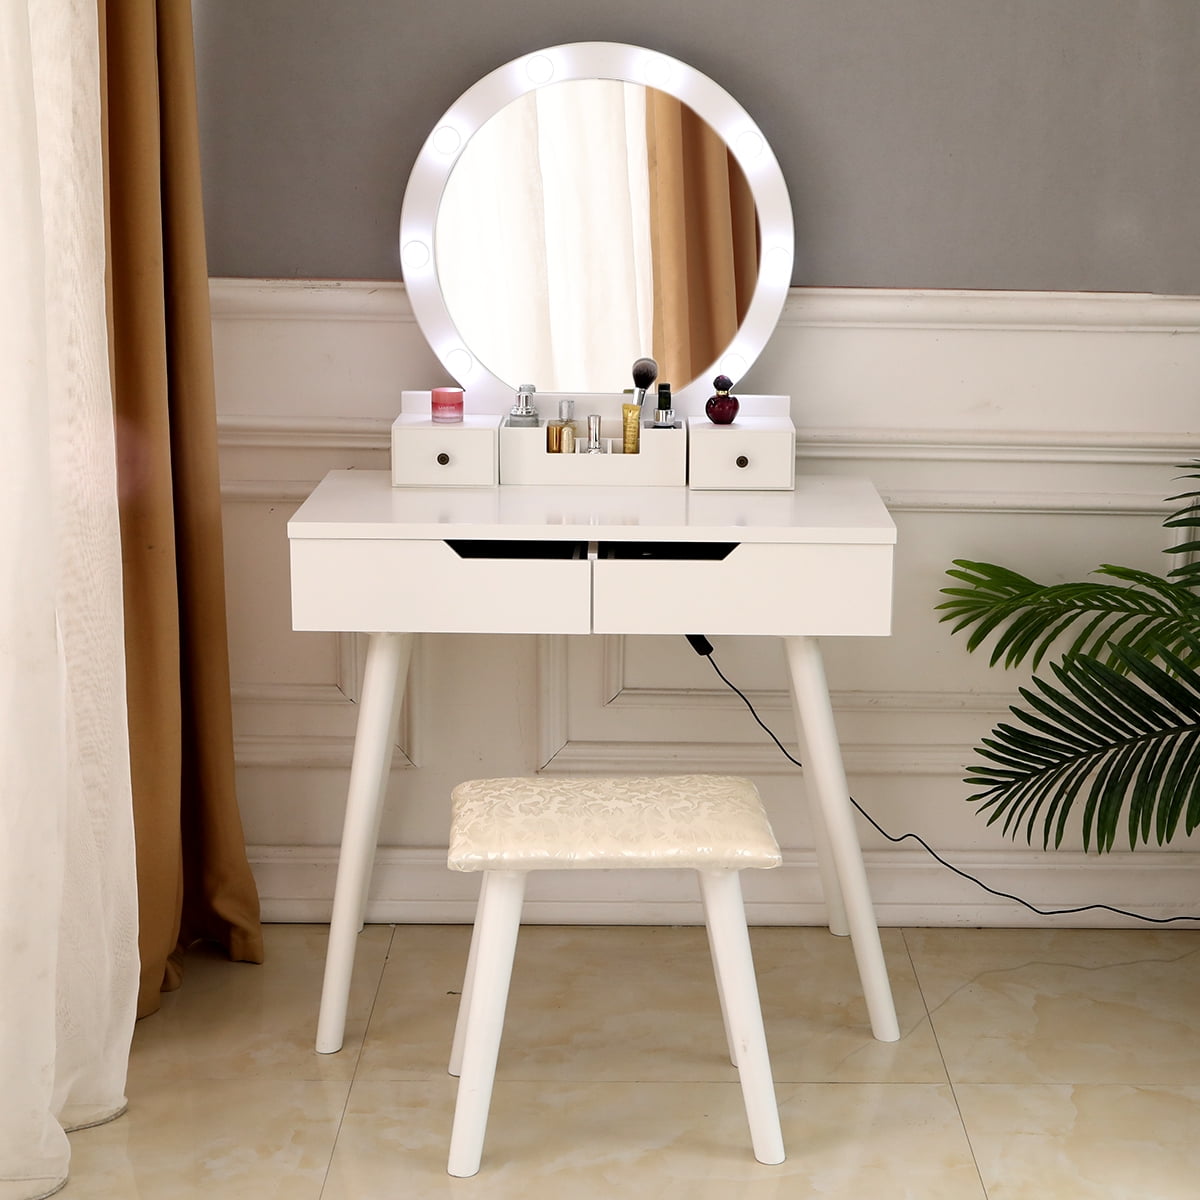 Zimtown Vanity Dressing Table Set with Lighted Makeup ...